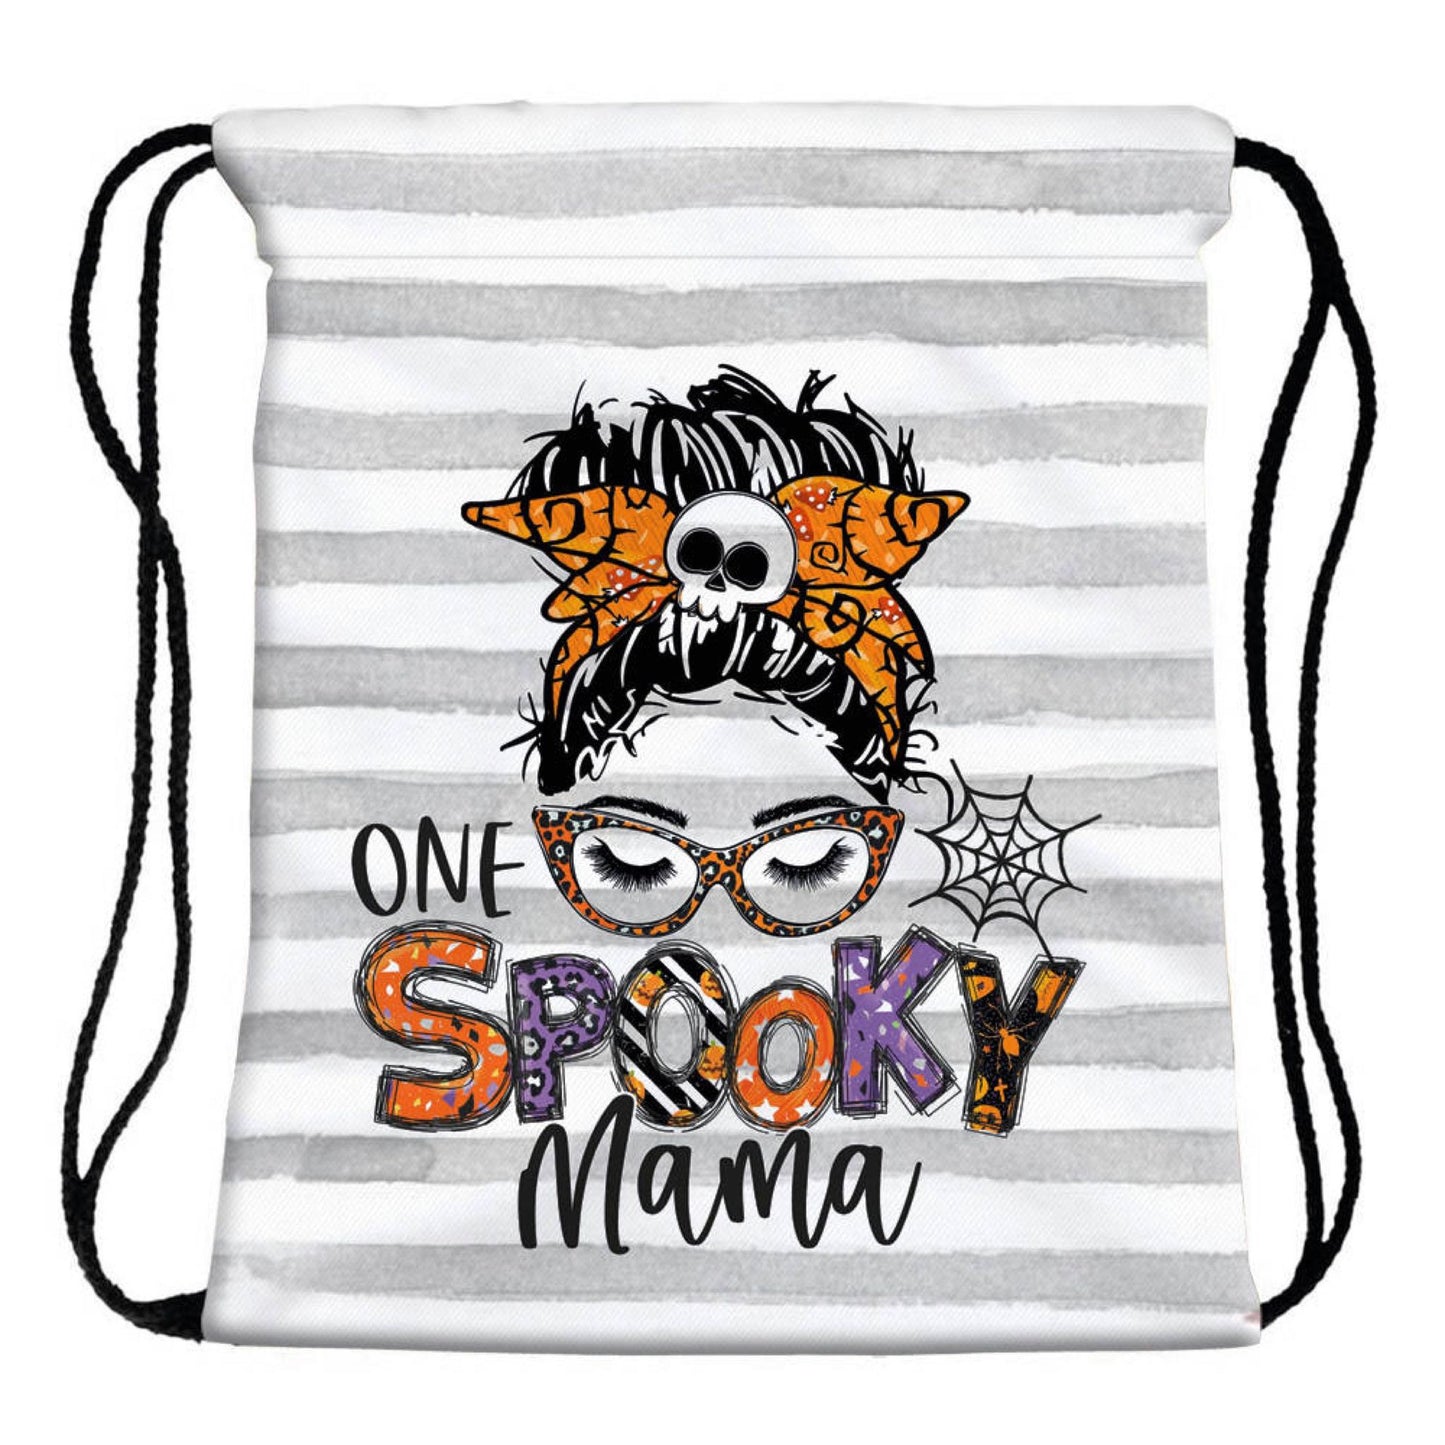 One Spooky Mama - Water Resistant Drawstring Bag - Backpack